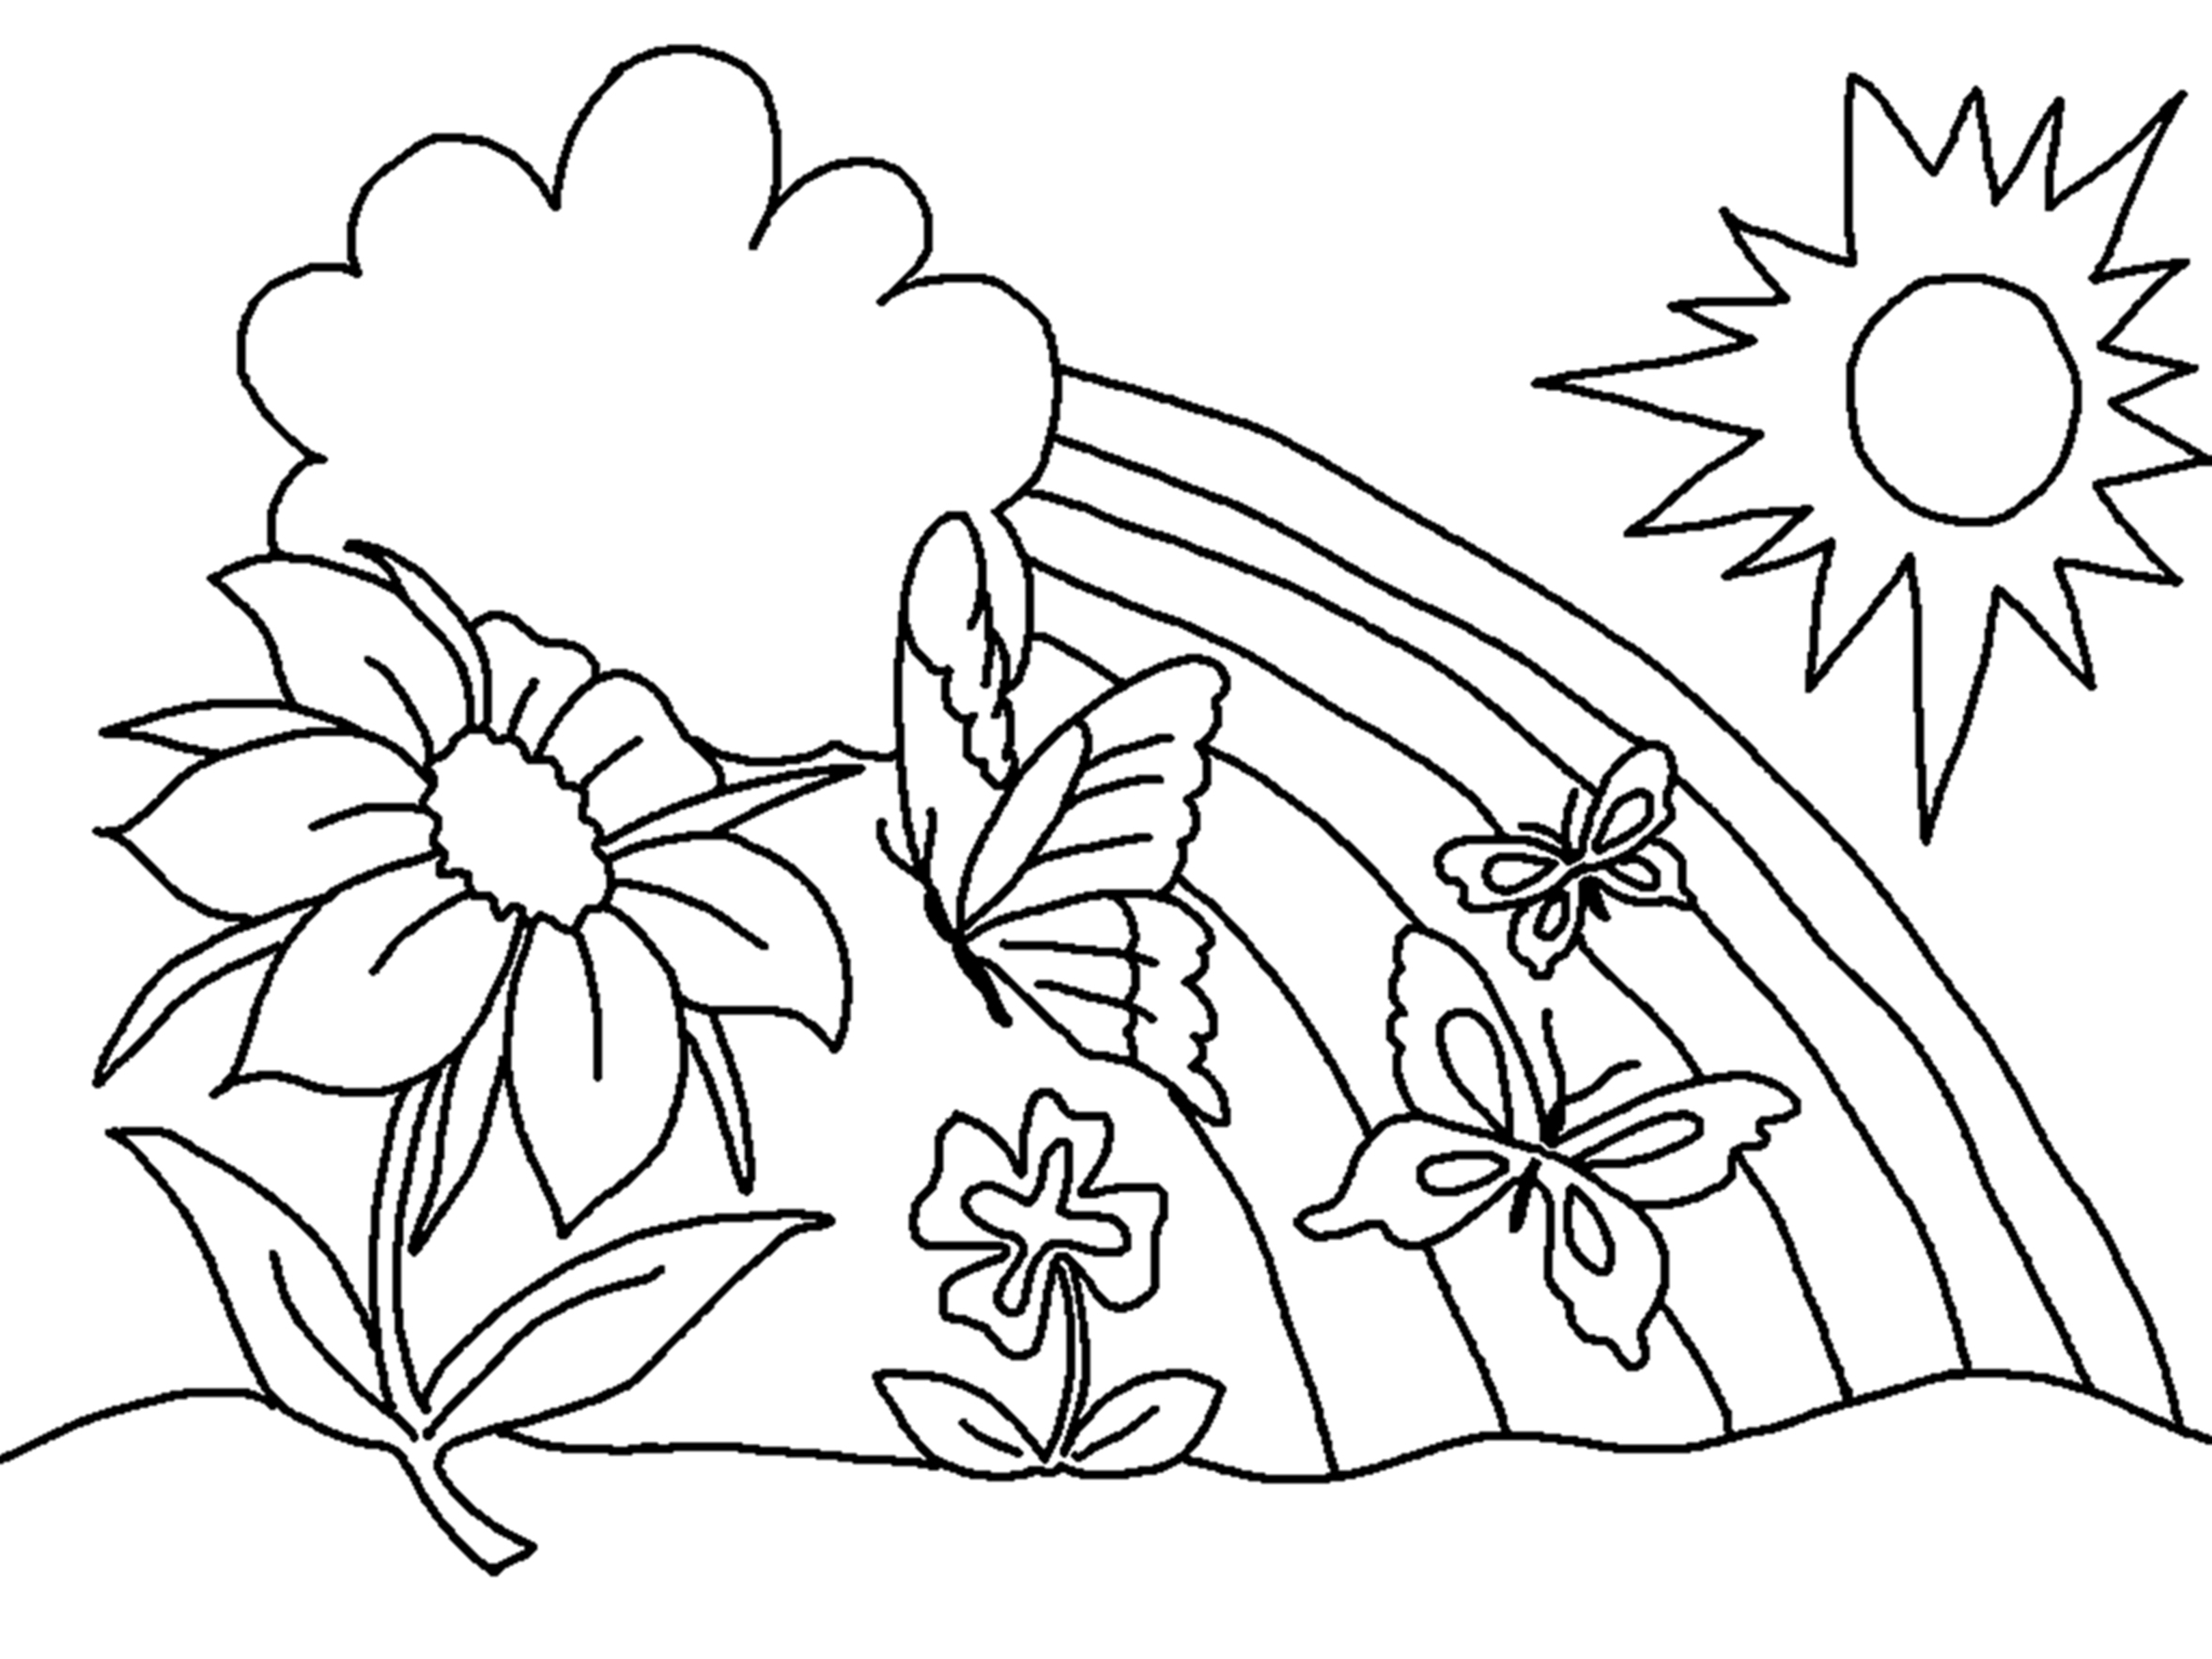 Poochyena Coloring Pages Archive With Tag Free Printable Pictures Of Flowers To Color